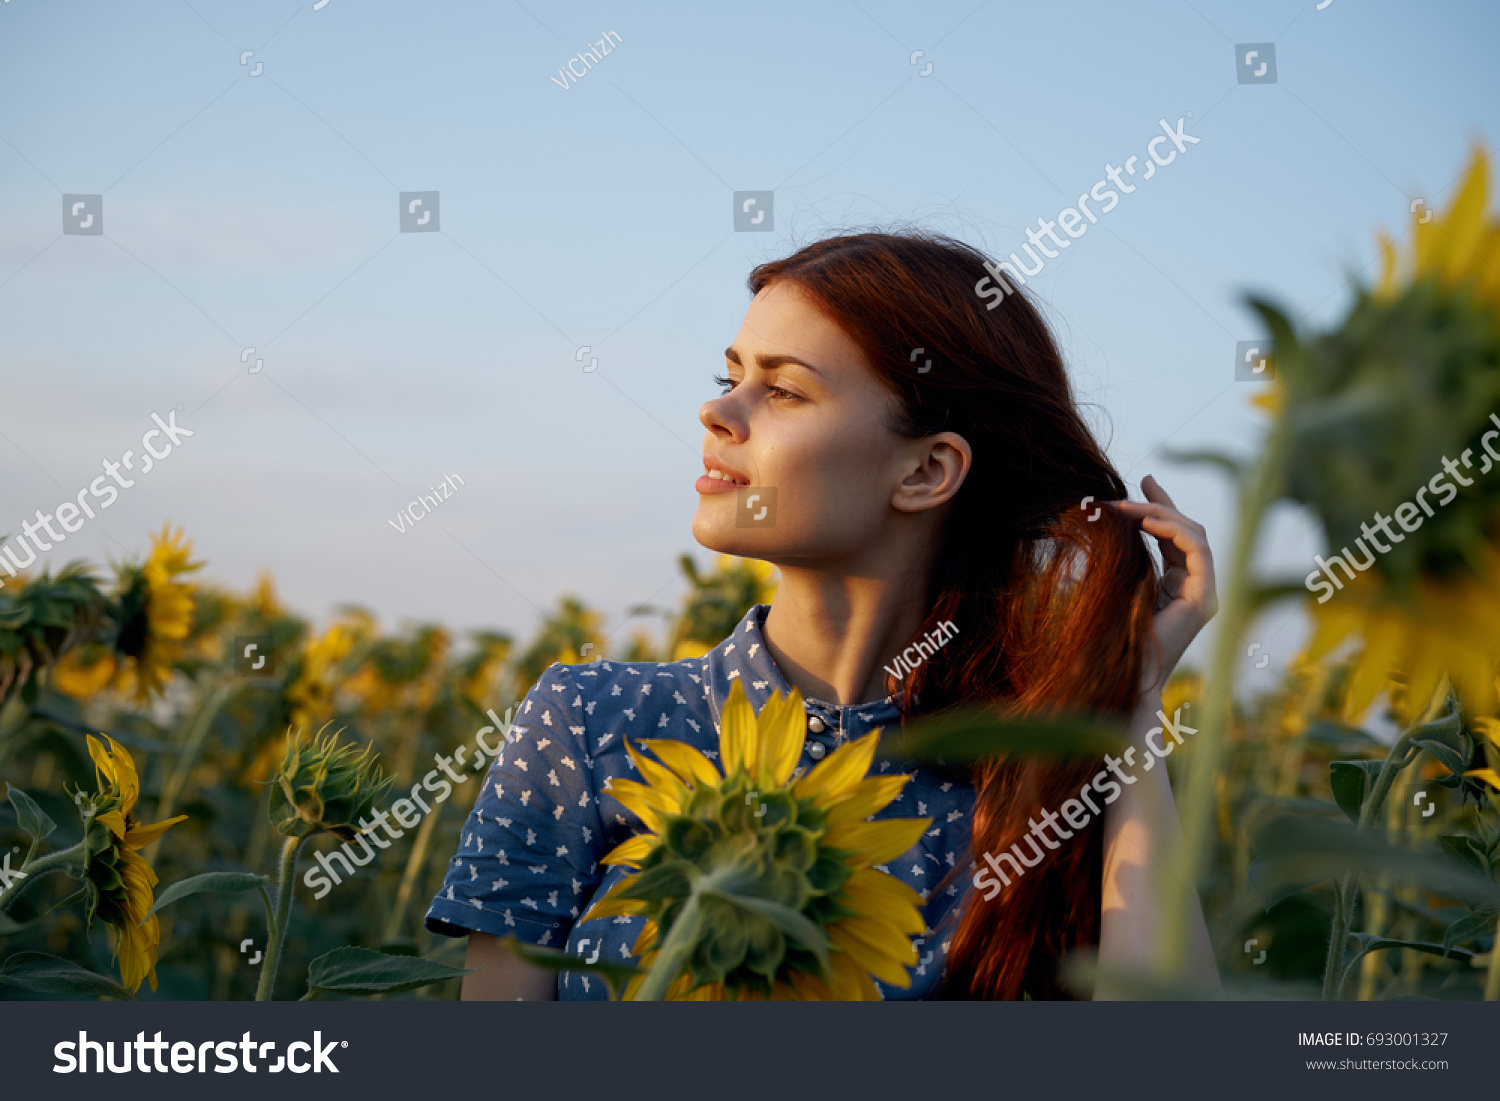 Woman looking at sunset, sunflowers                                #693001327